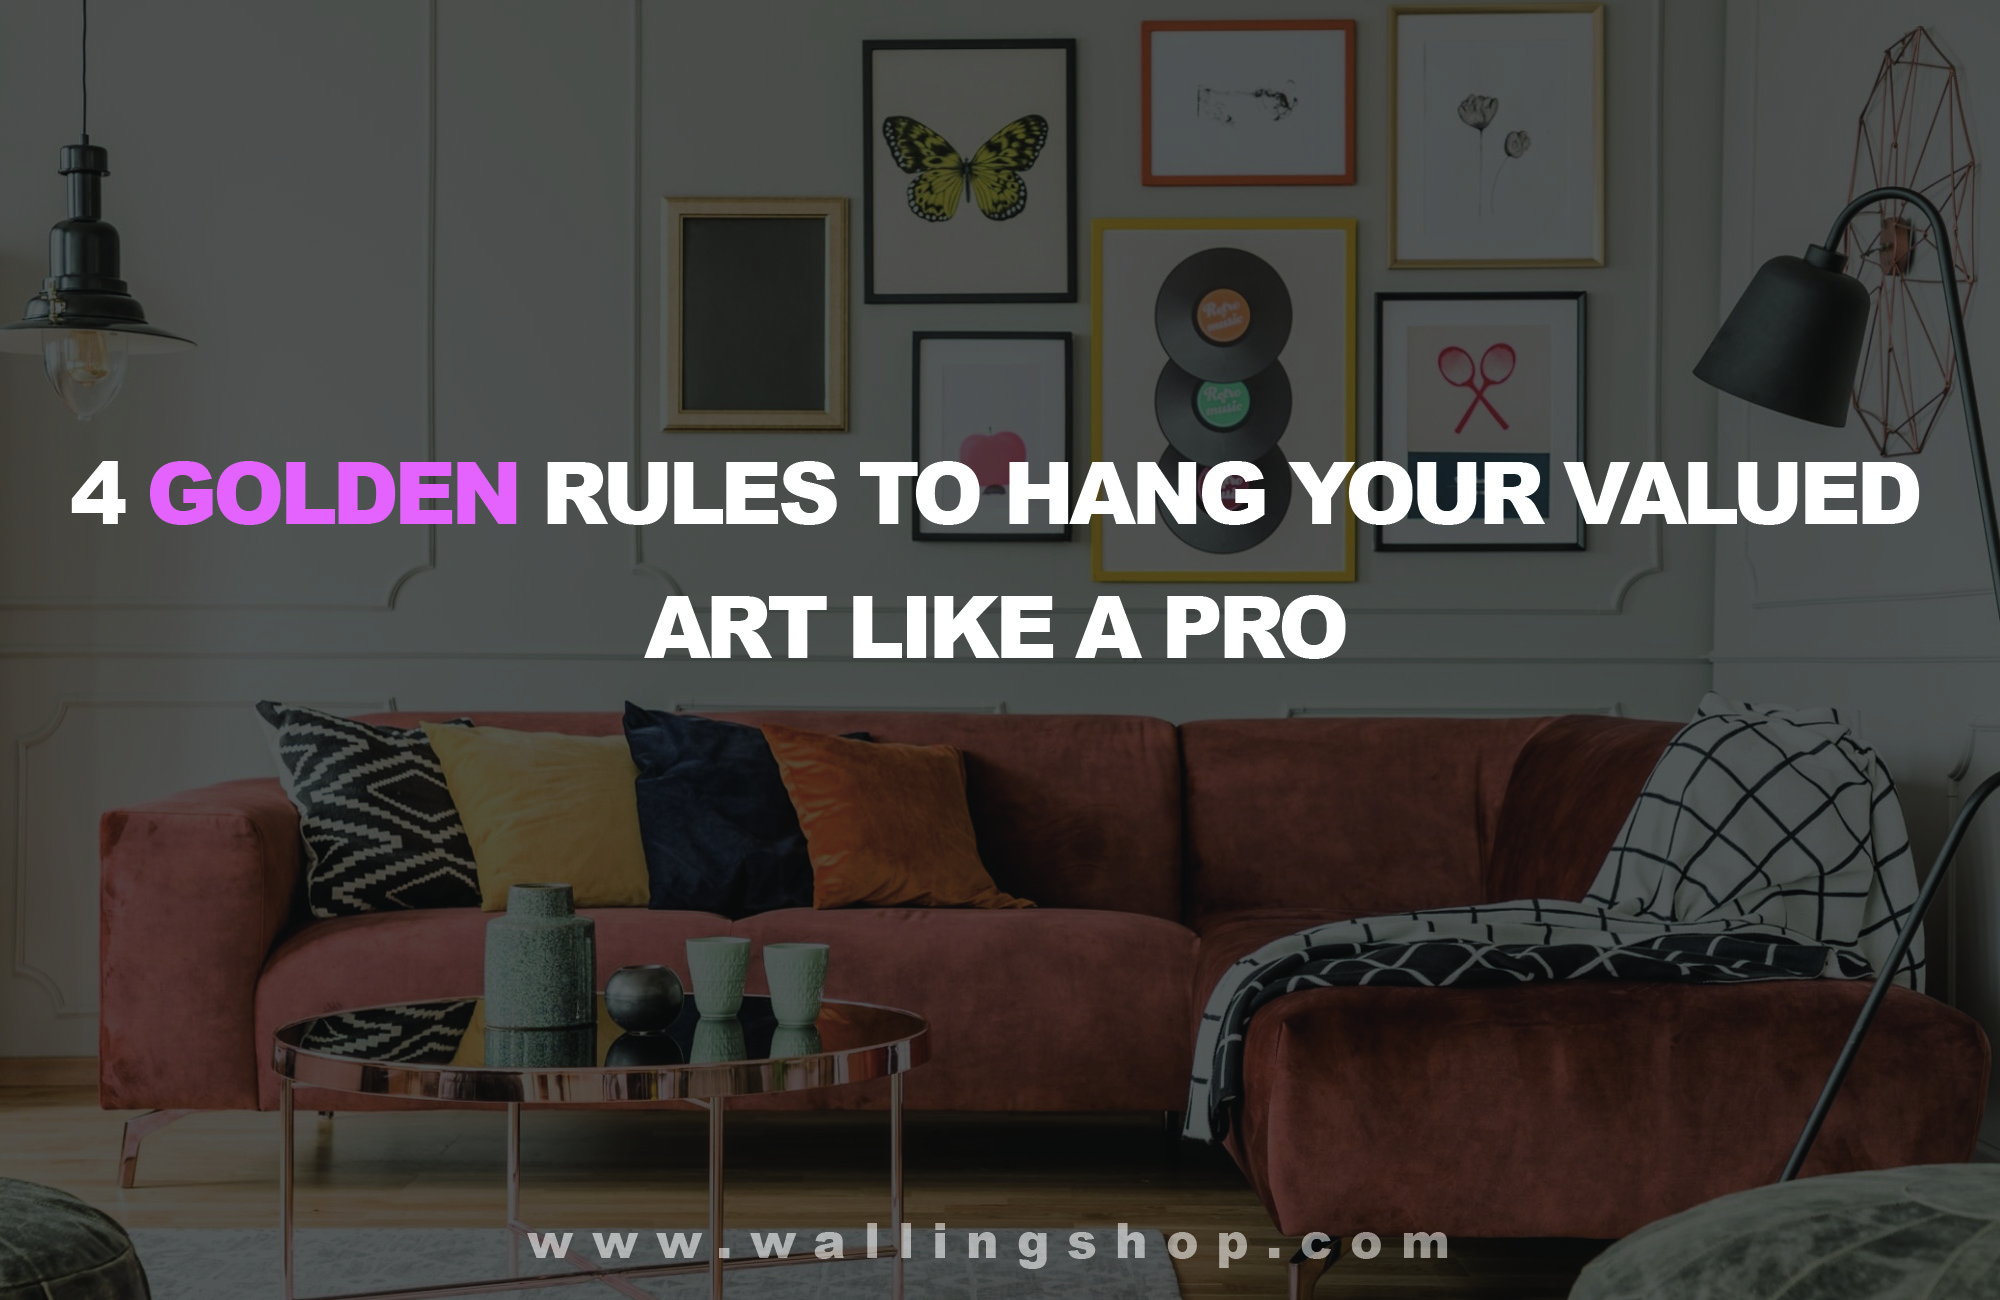 4 Golden Rules To Hang Your Valued Art Like A Pro